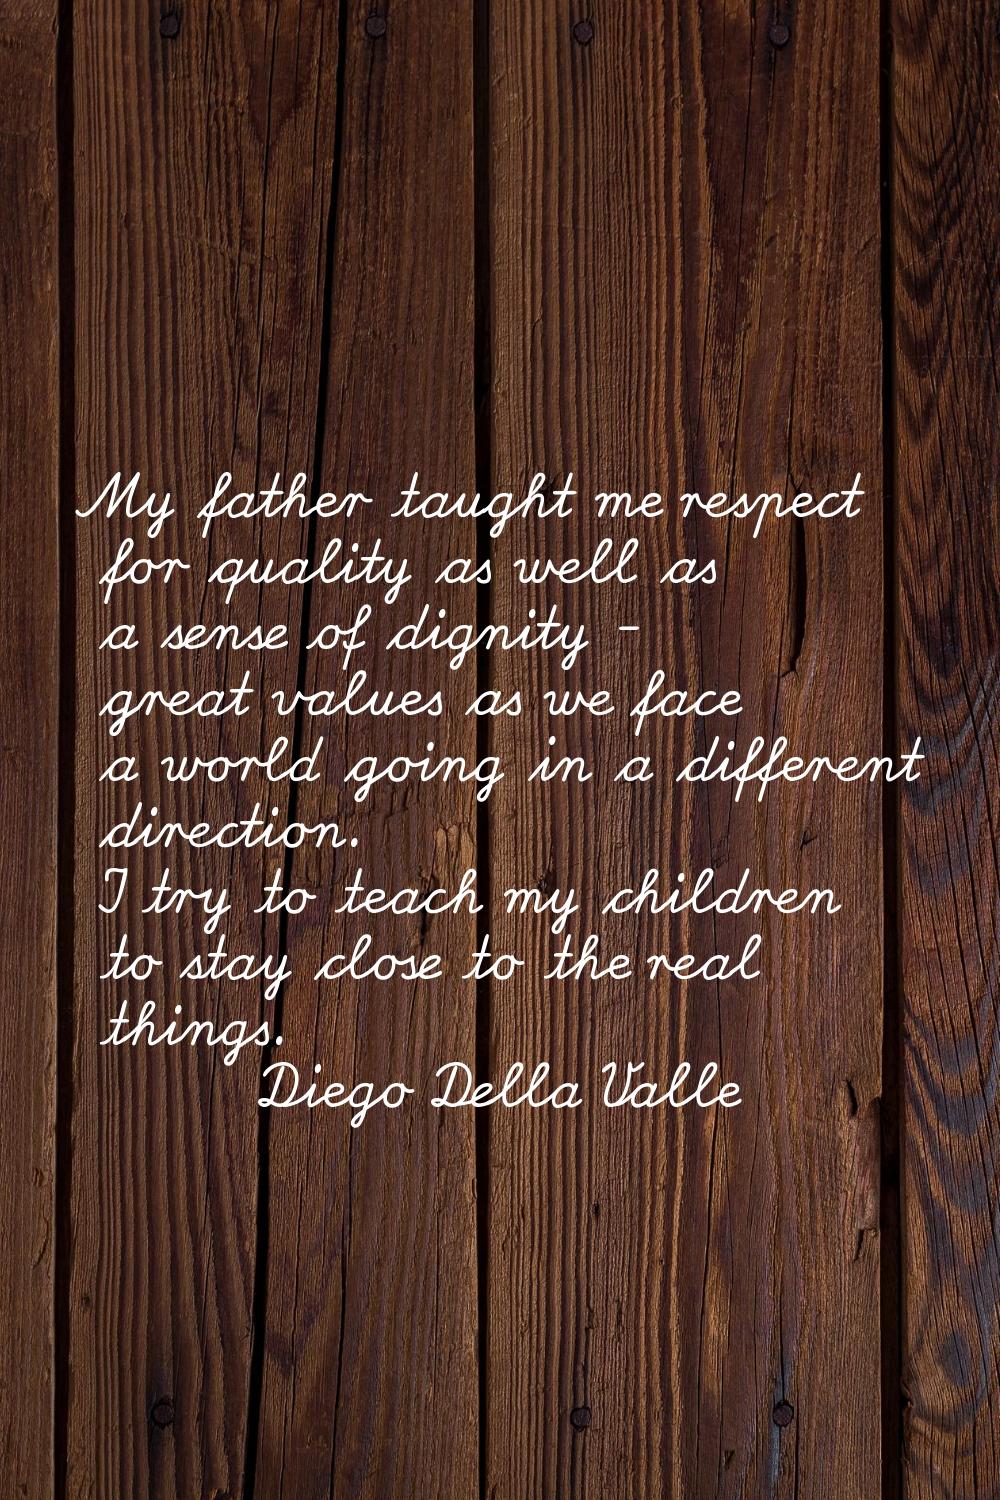 My father taught me respect for quality as well as a sense of dignity - great values as we face a w